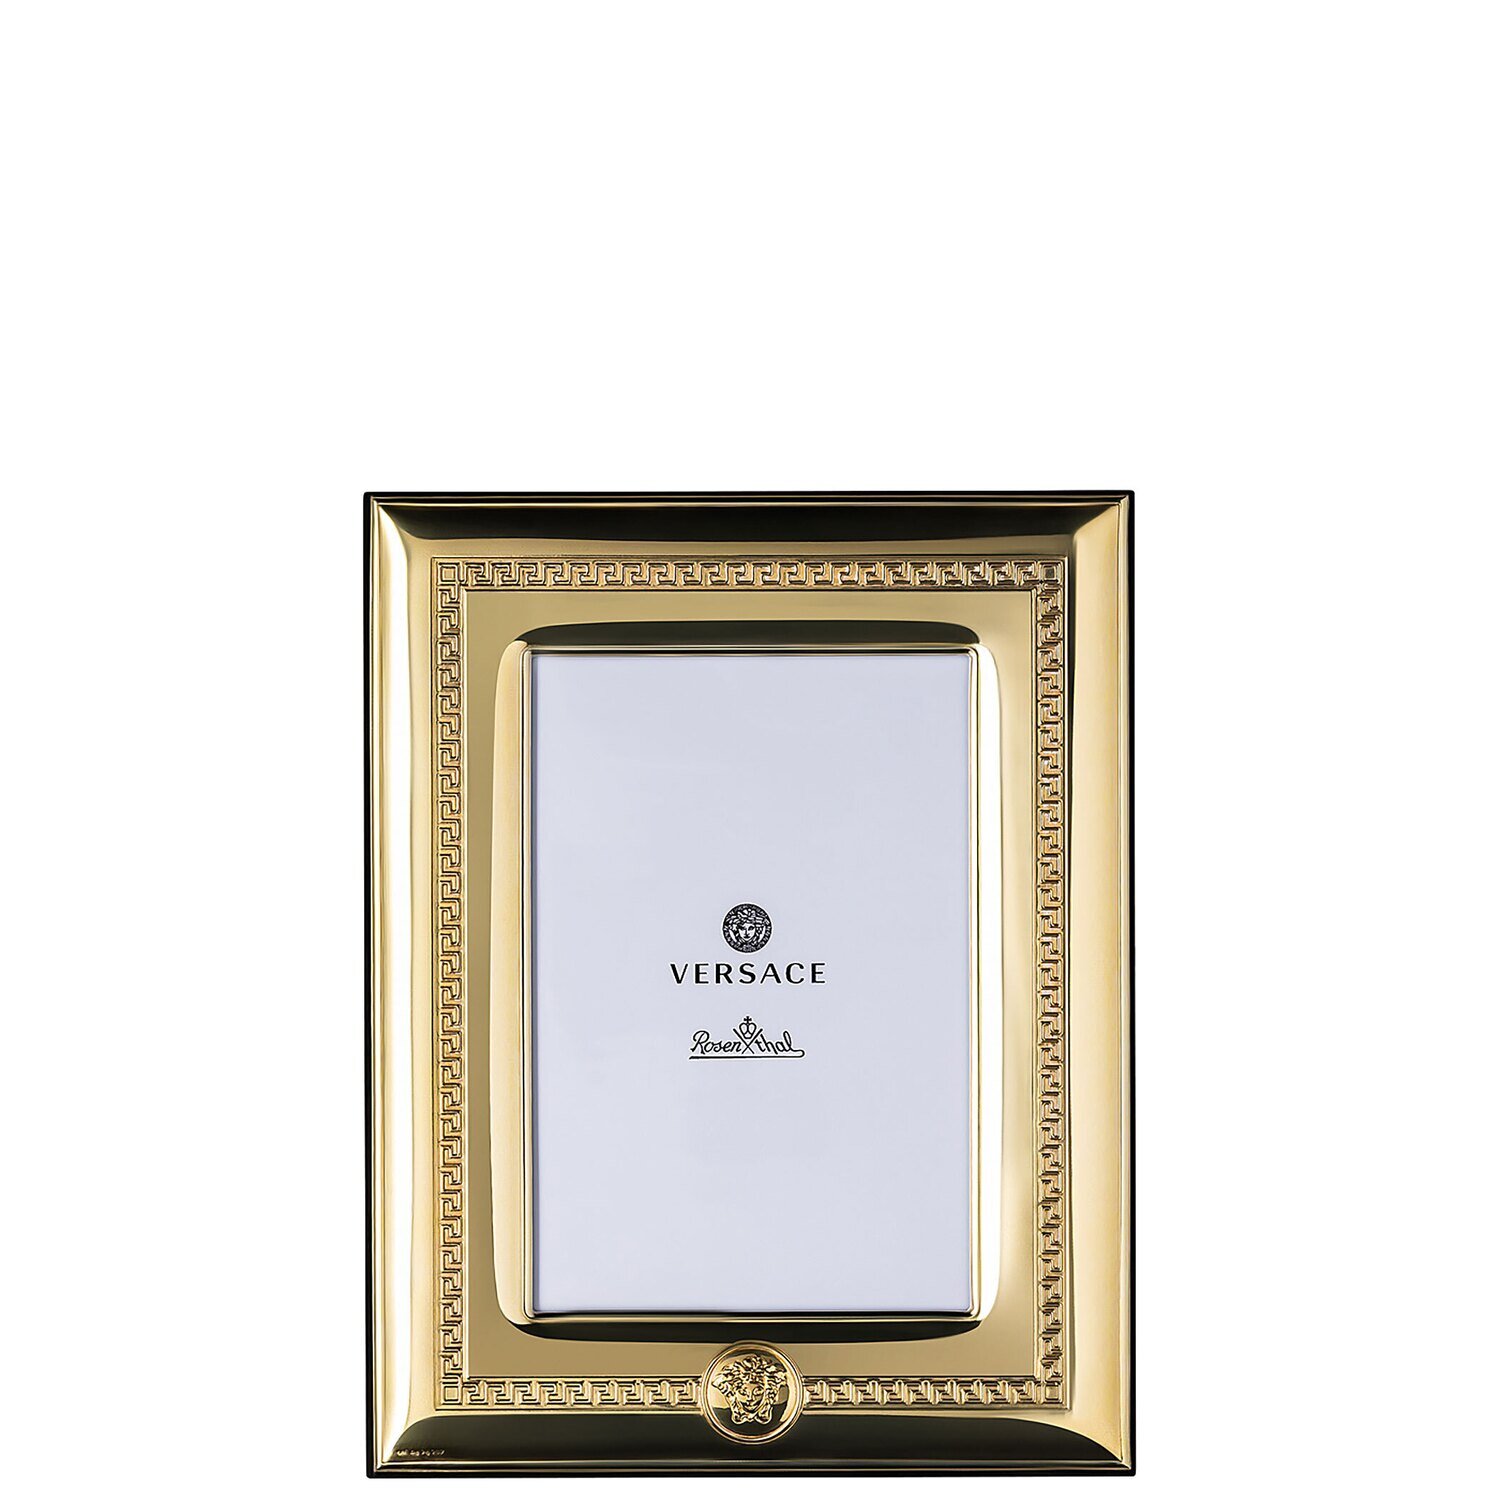 Versace VHF6 Gold Picture Frame 6 x 7 3/4 Inch